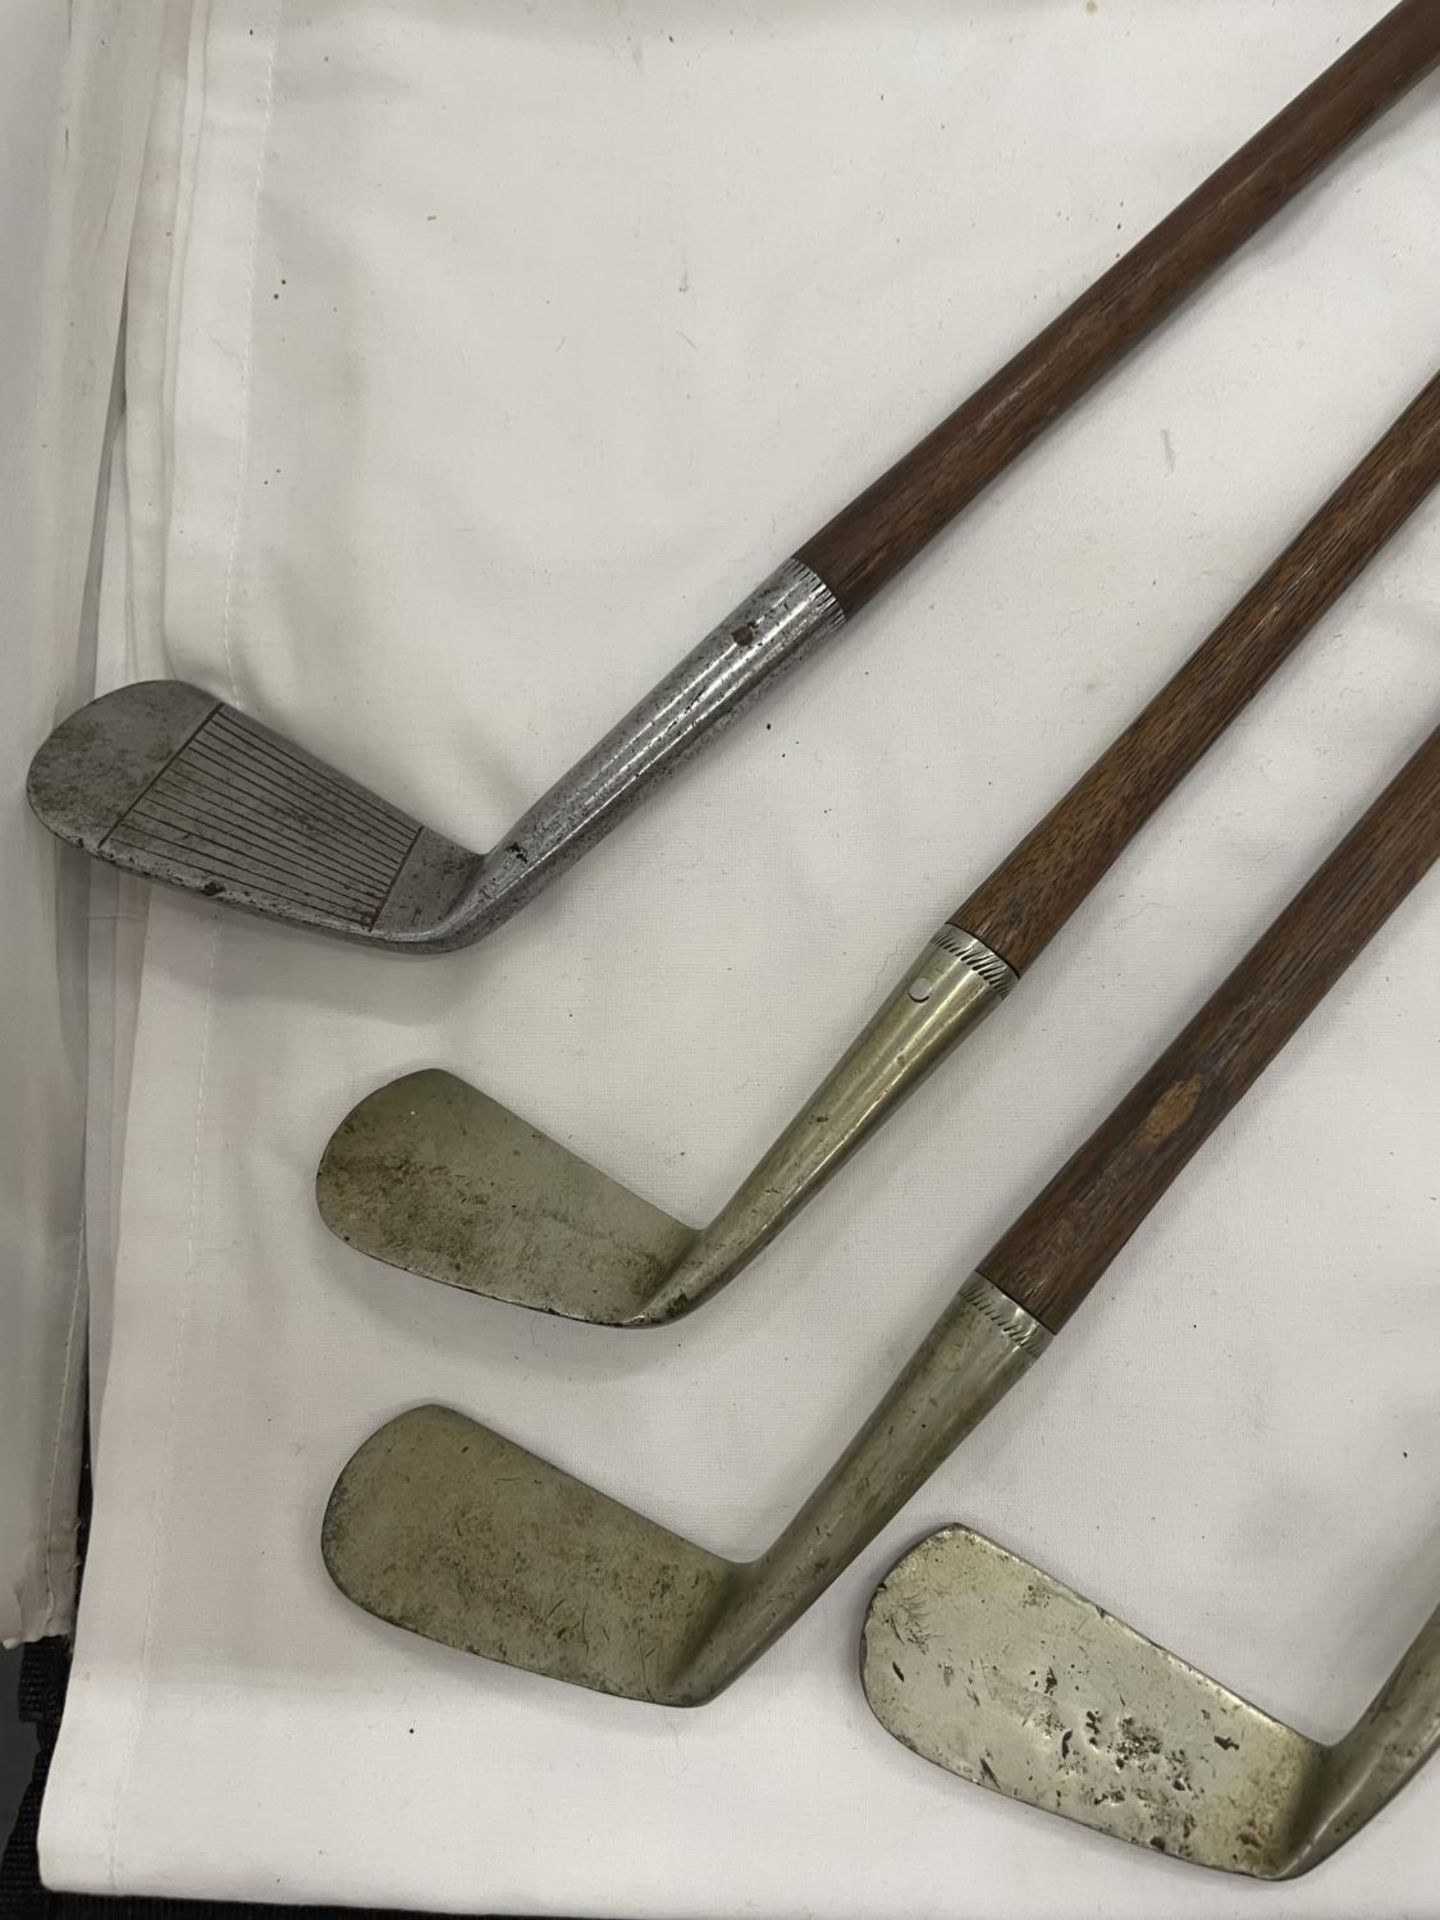 FOUR VINTAGE GOLF CLUBS WITH HICKORY SHAFTS, THREE 'SHELL' AND ONE 'THORNTONS' - Image 2 of 2